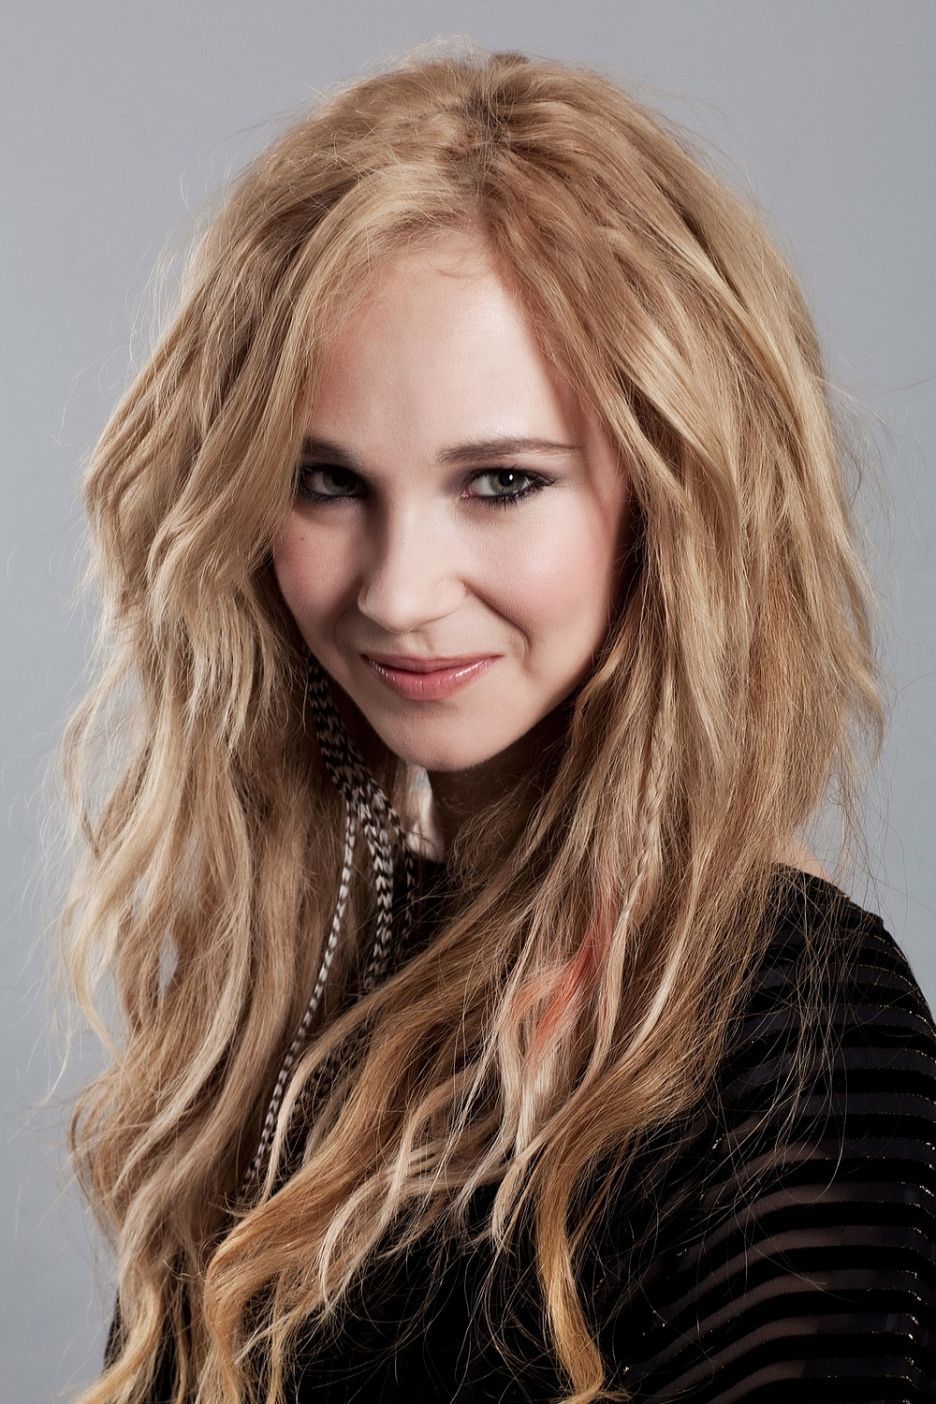 Picture of Juno Temple. Juno temple, Hair picture, Hair styles